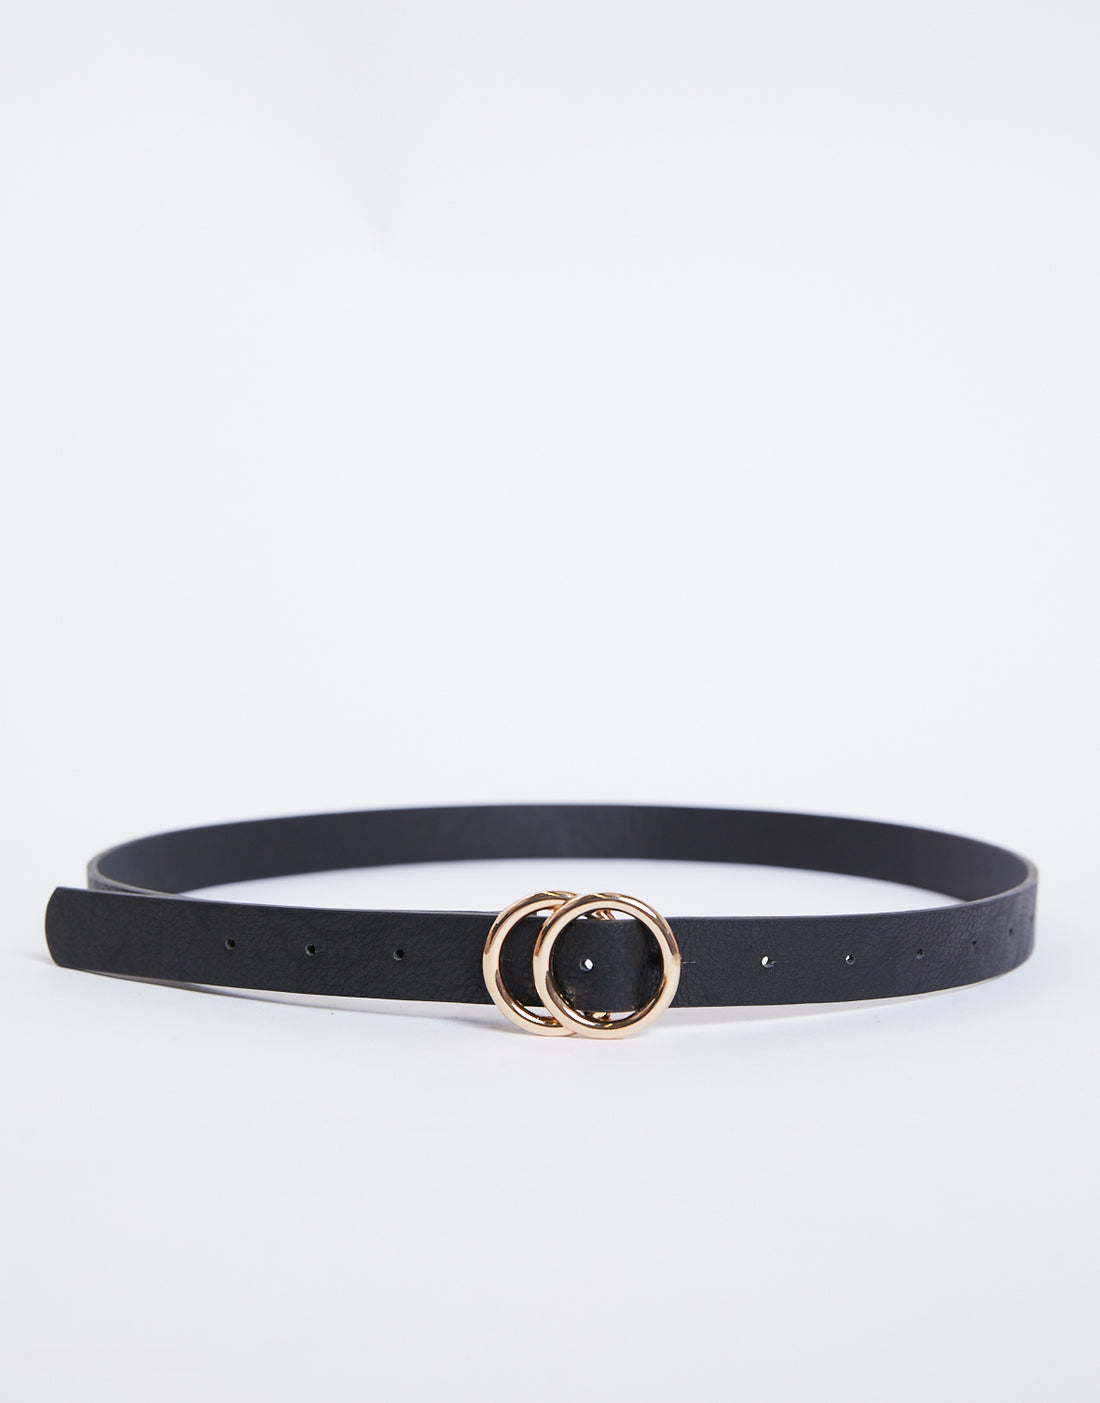 In Circles Simple Belt Accessories Black/Gold One Size -2020AVE